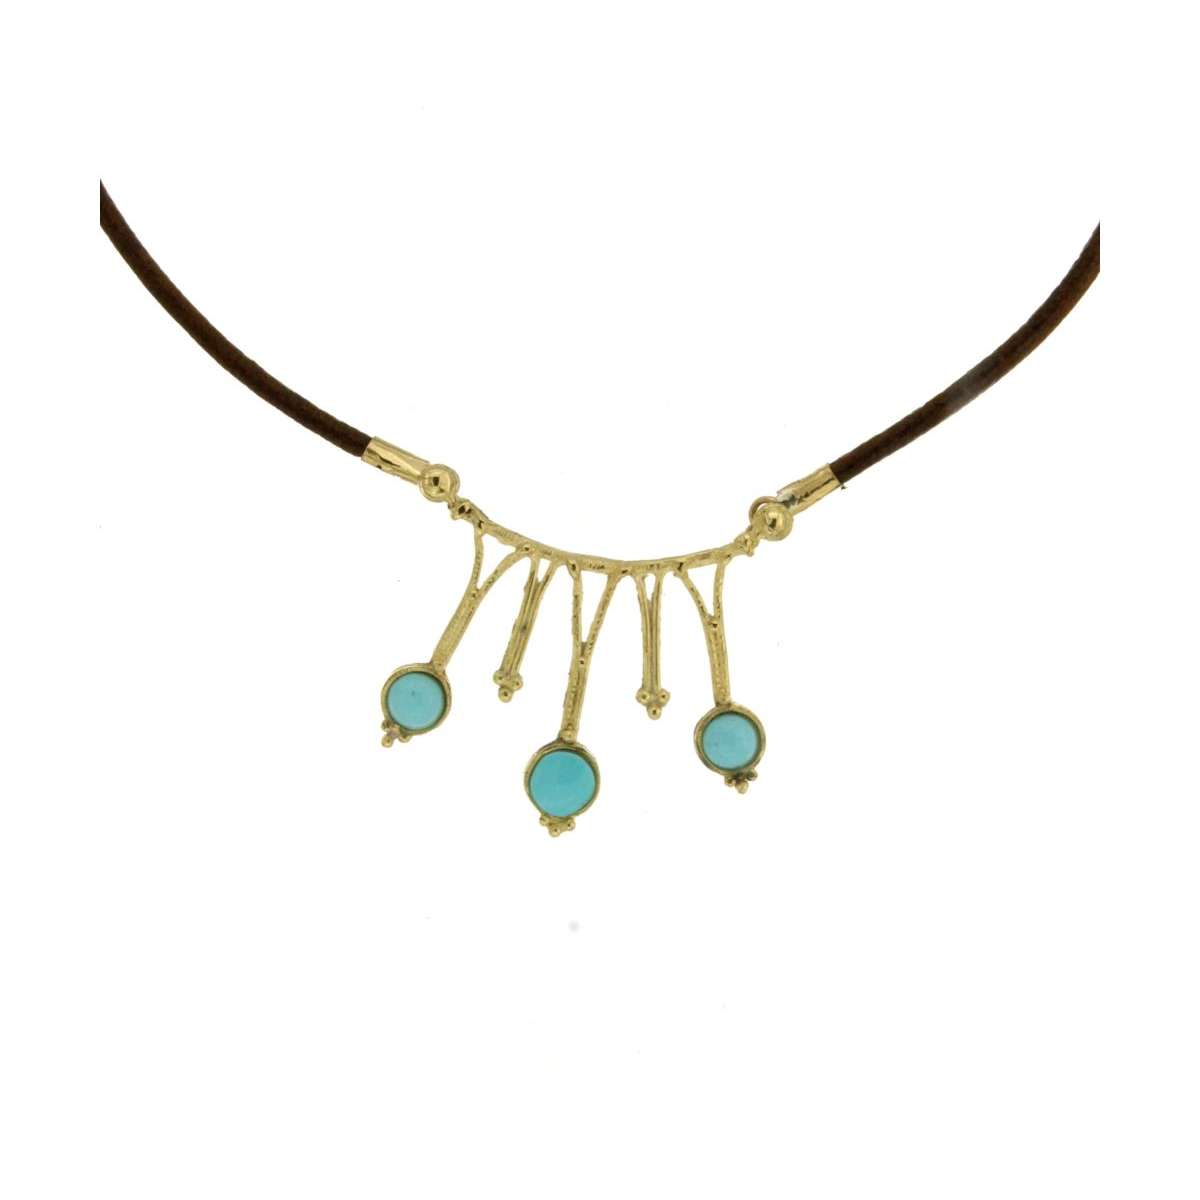 Necklace made with yellow gold in lost wax and turquoise paste